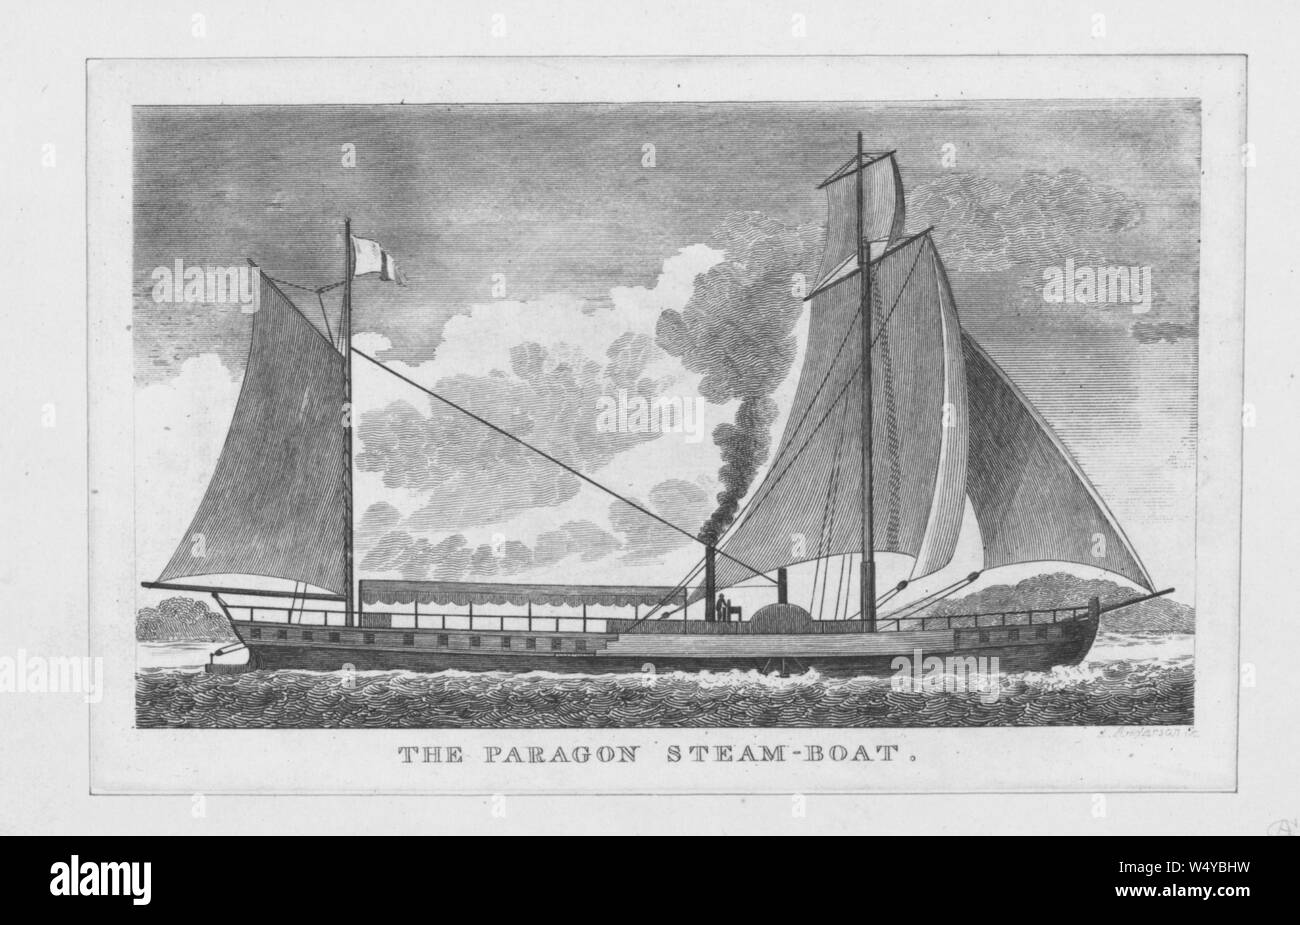 Engraving of the Paragon steam-boat, drawing by Robert Fulton, 1880. From the New York Public Library. () Stock Photo